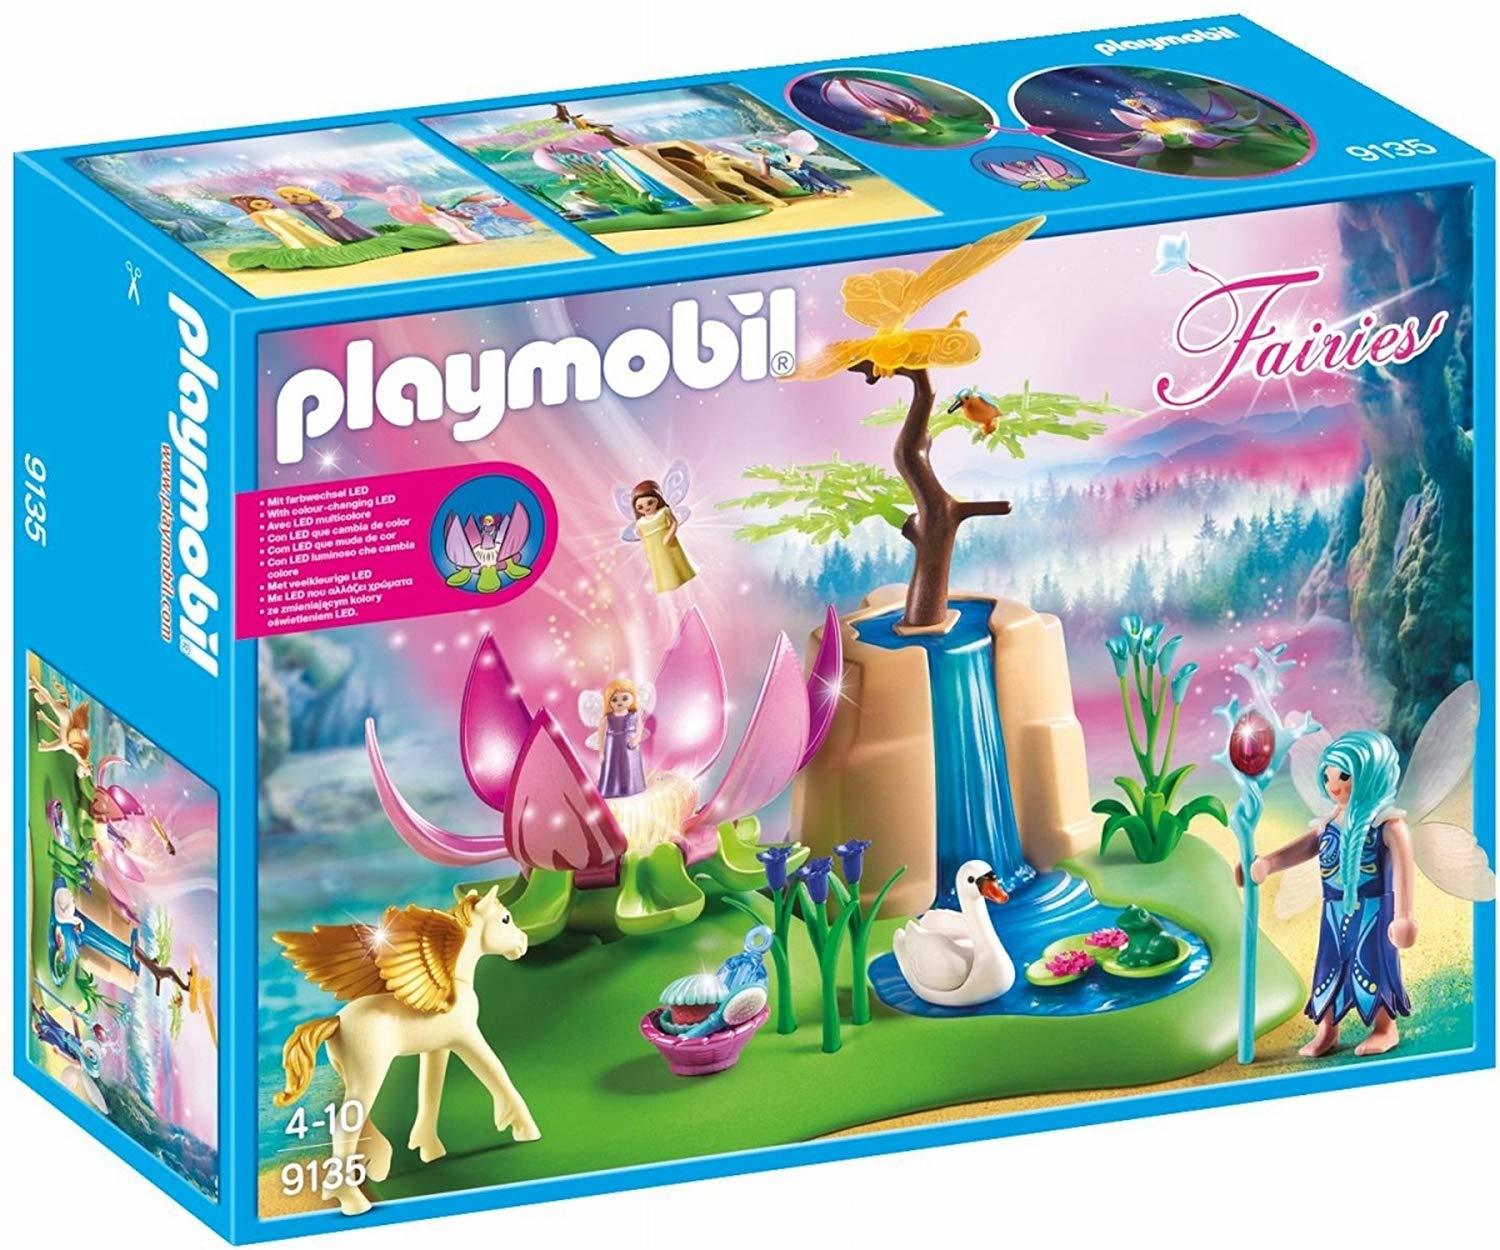 playmobil magical fairy forest playset